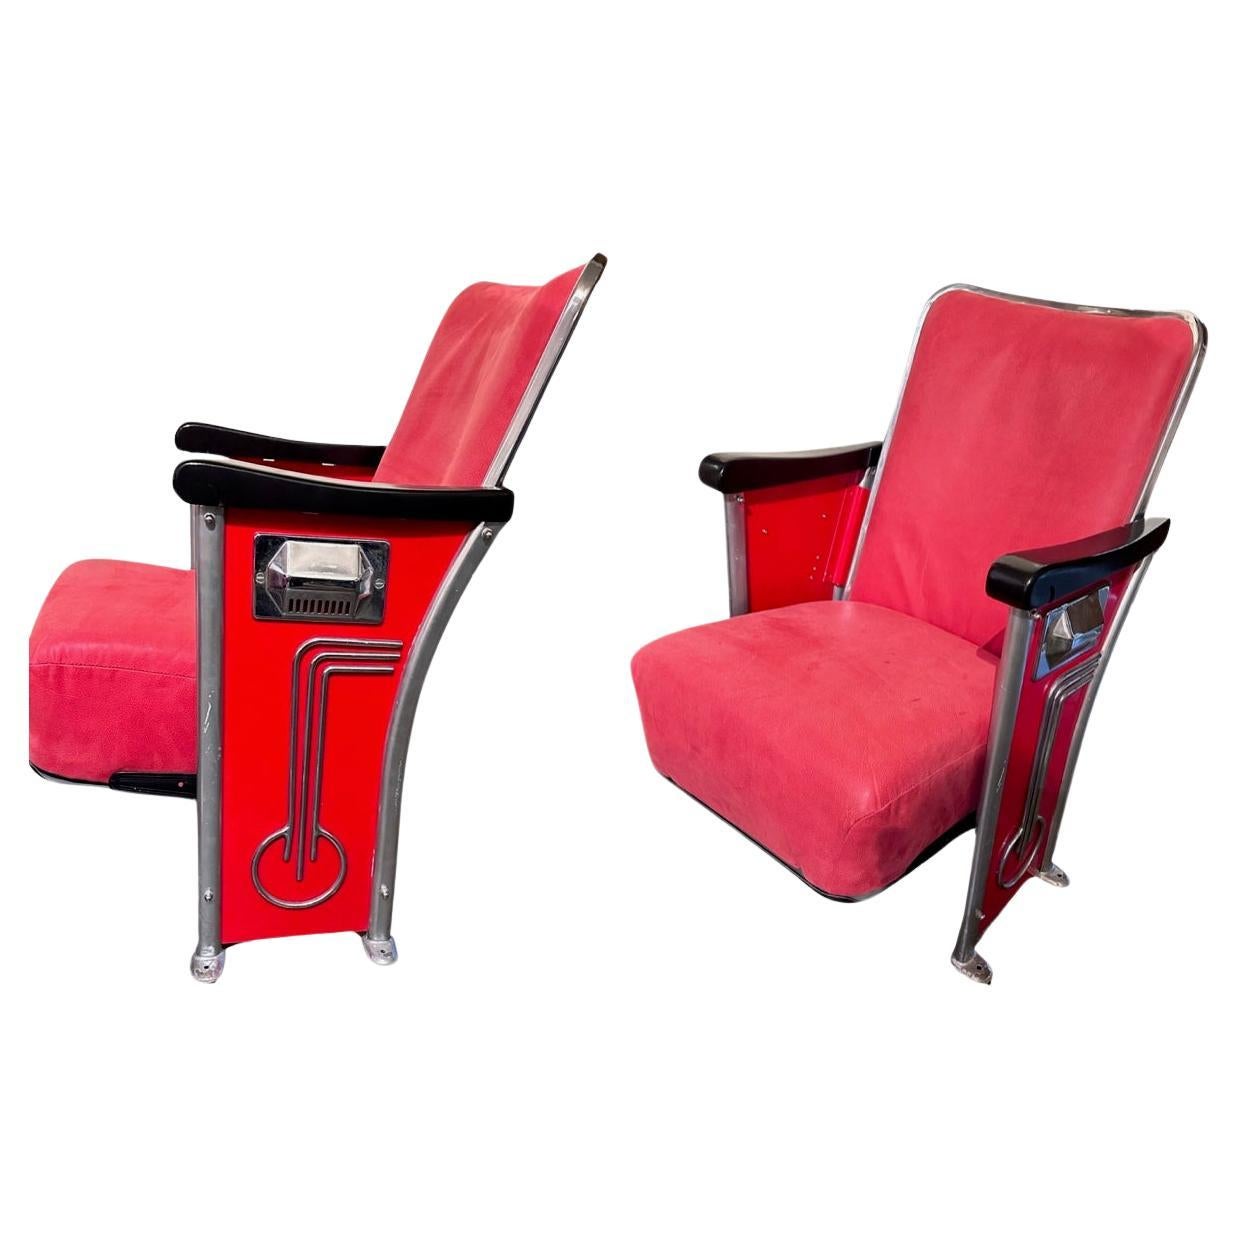 Restored Art Deco Movie Theater Seats Pair For Sale